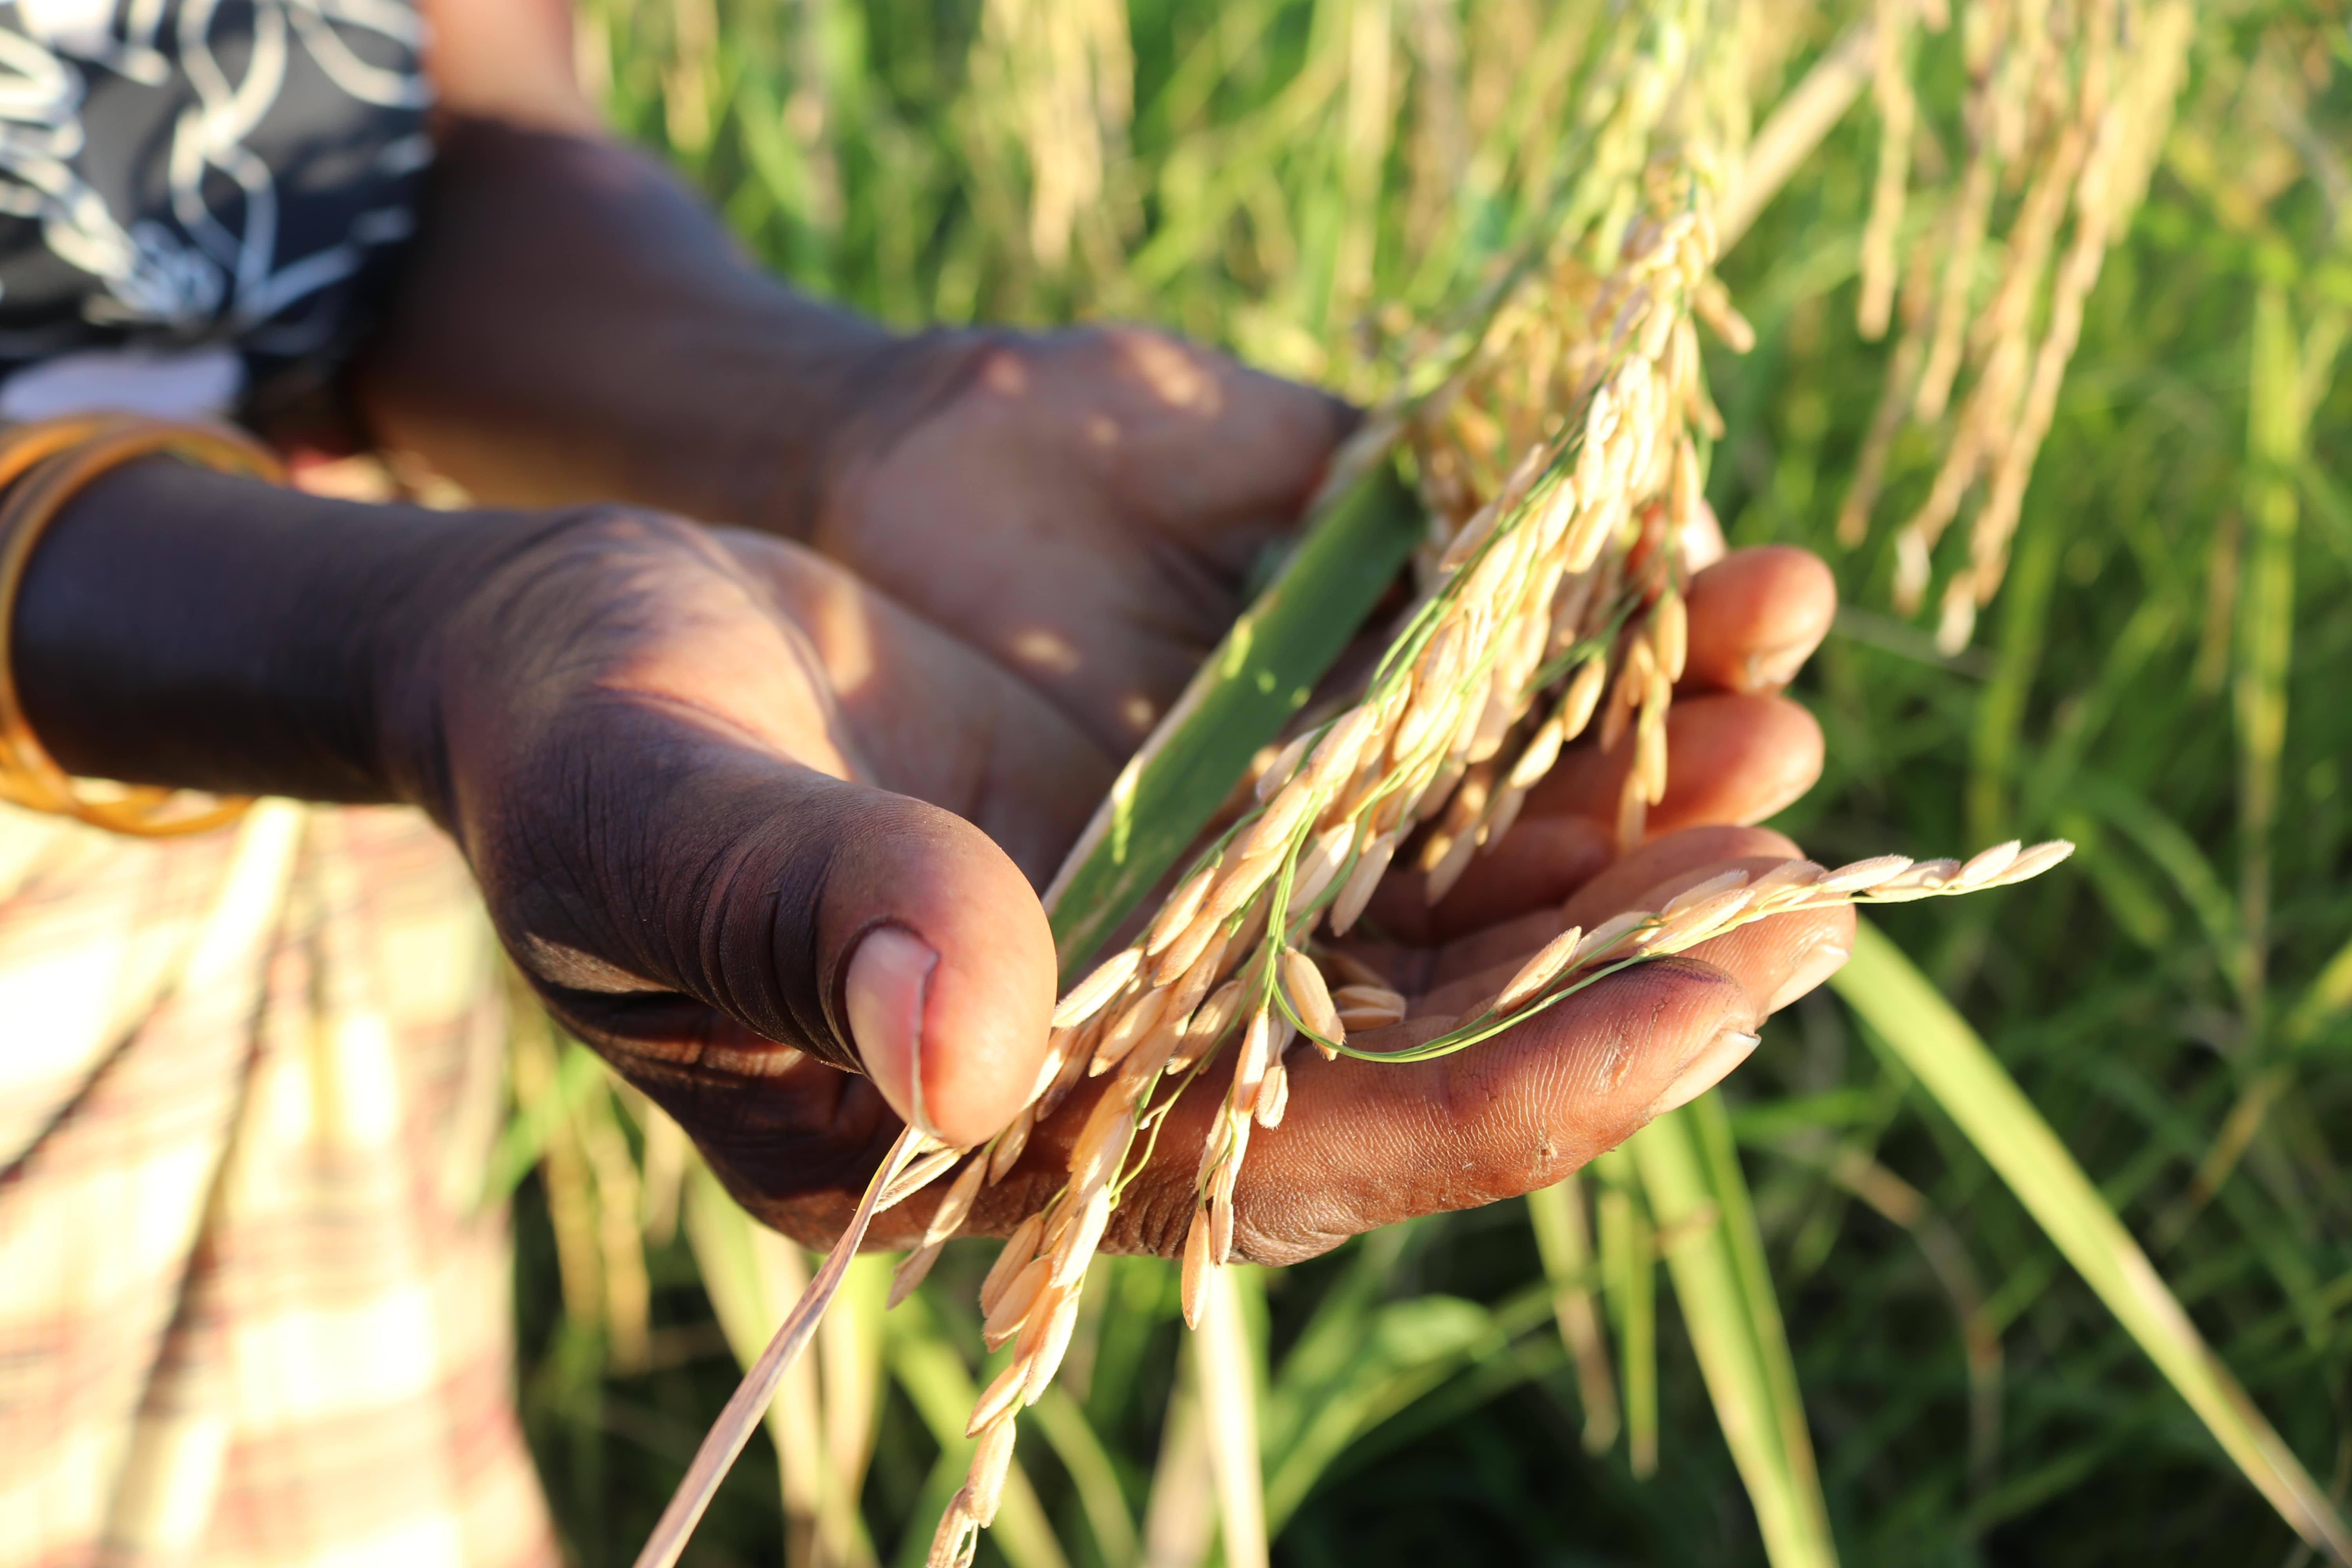 within two weeks, Ofélia will harvest rice